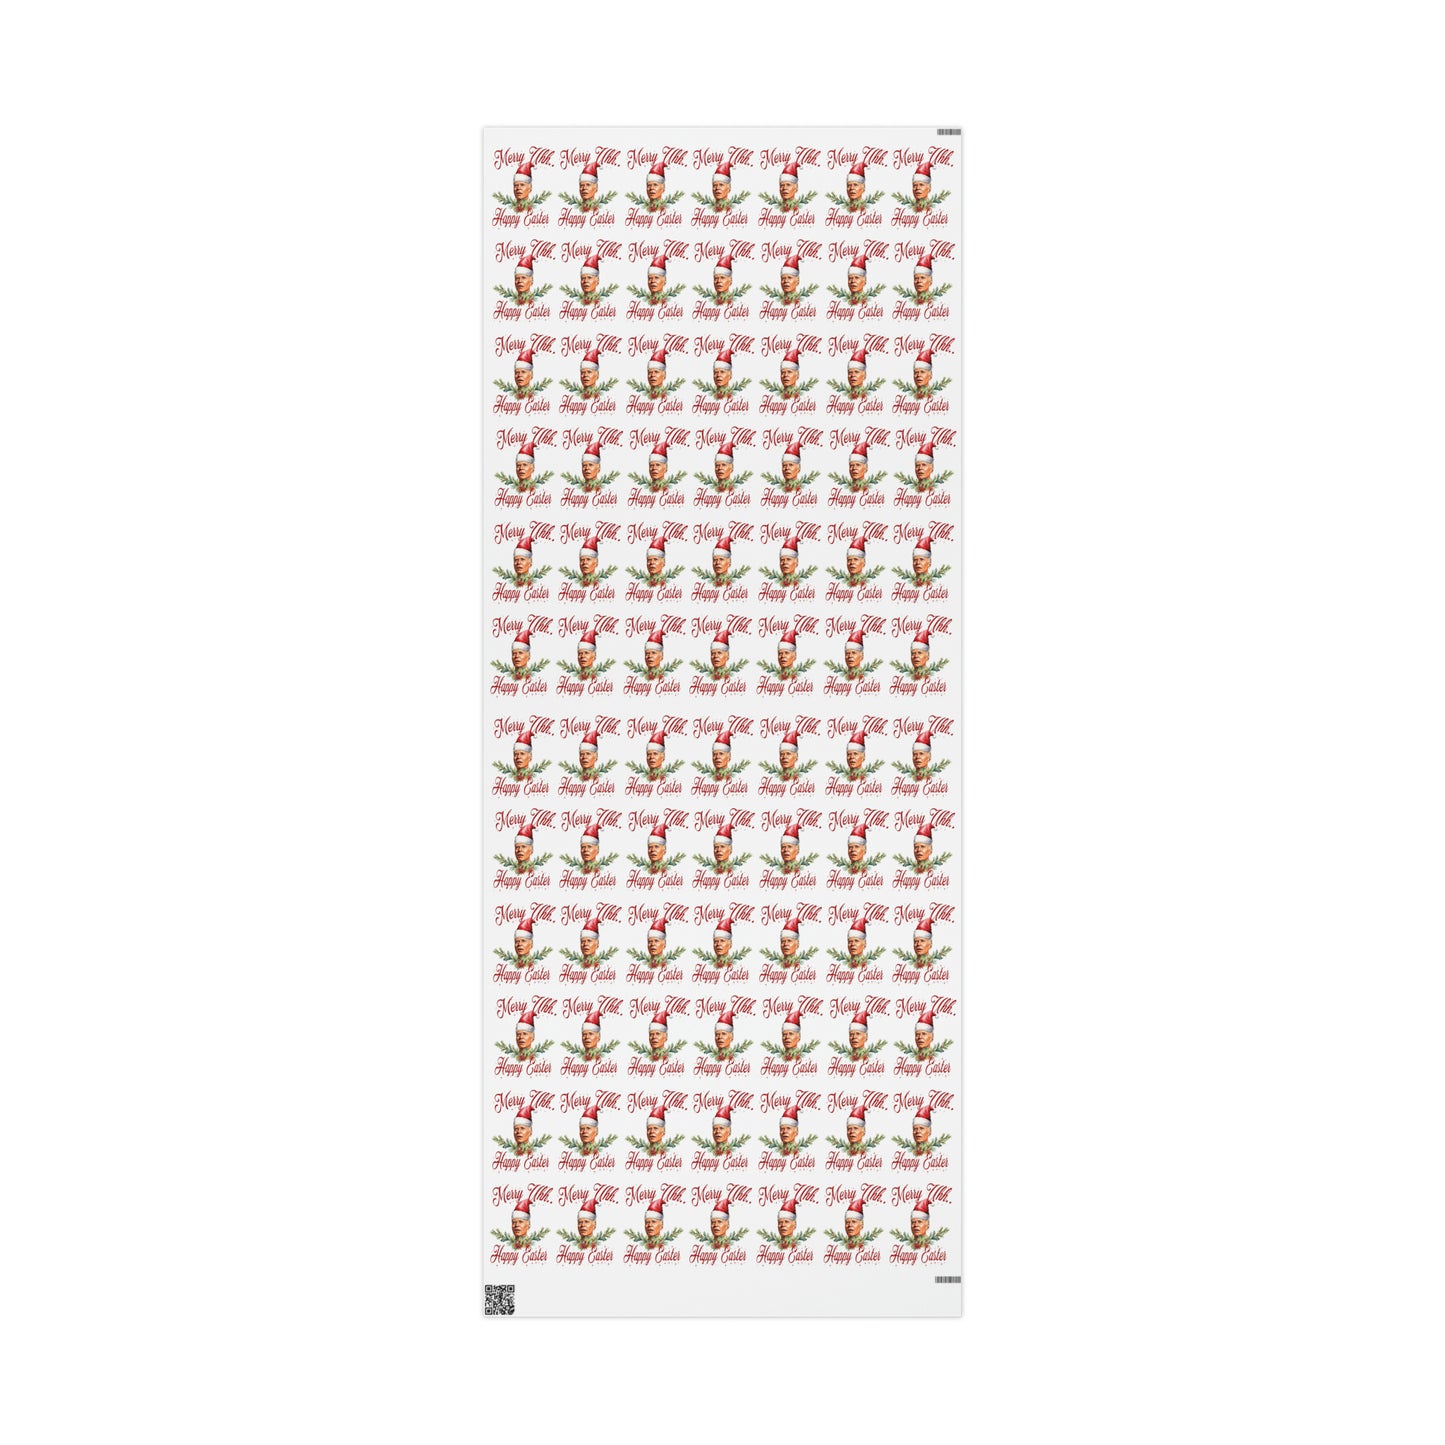 The Most Confused Biden Christmas Wrapping Paper - Make America Great Again Gift